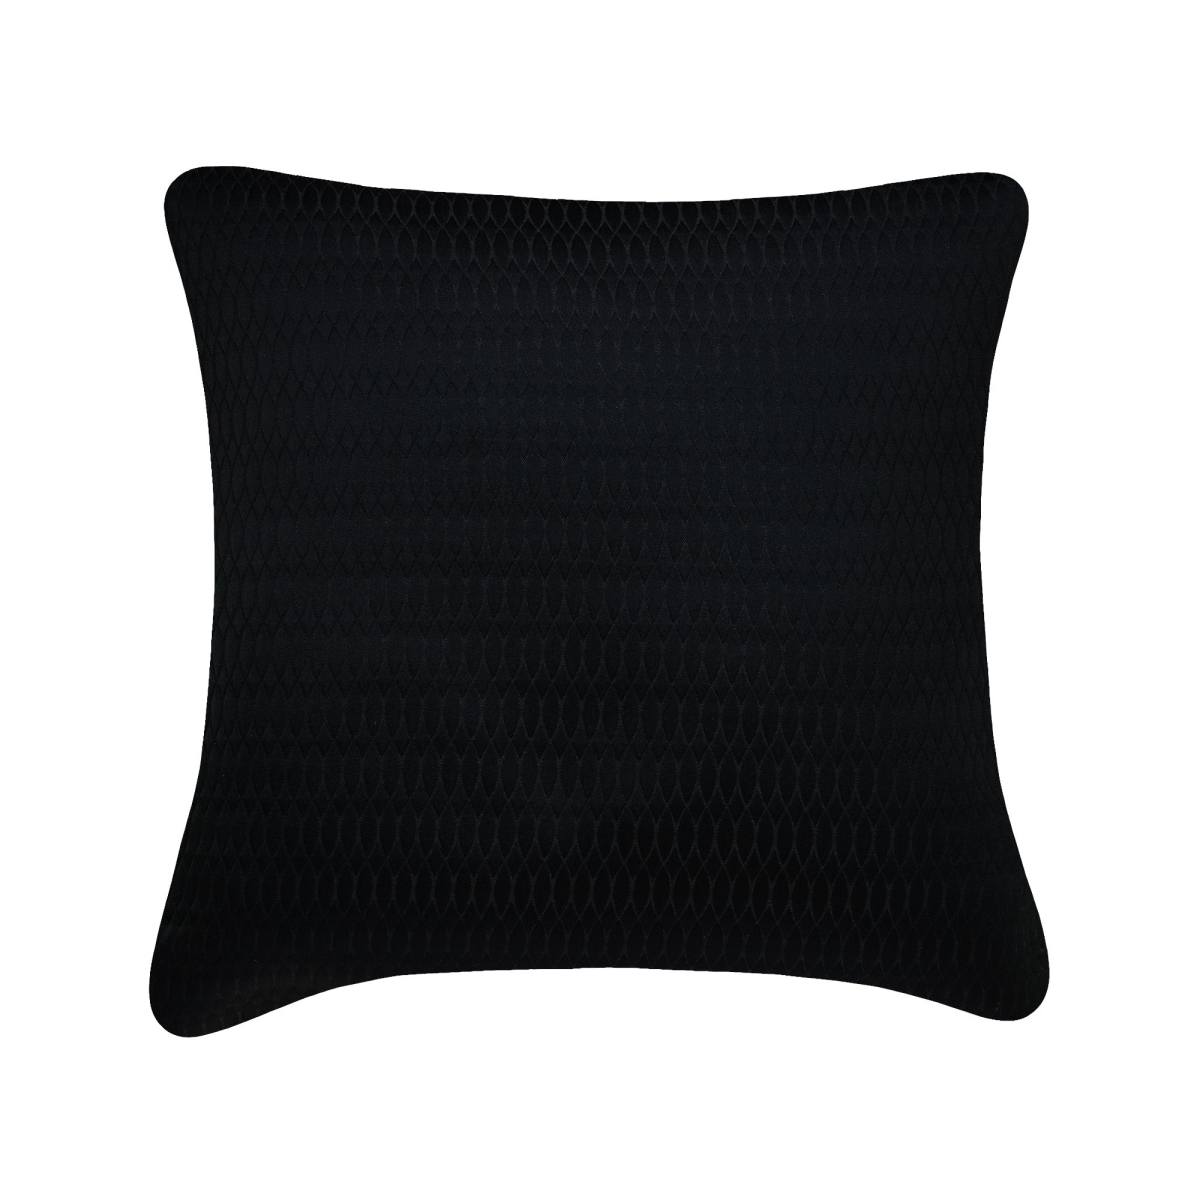 18 X 18 In. Biscay Euro Decorative Cushion, Onyx - 100 Percent Duck Feather